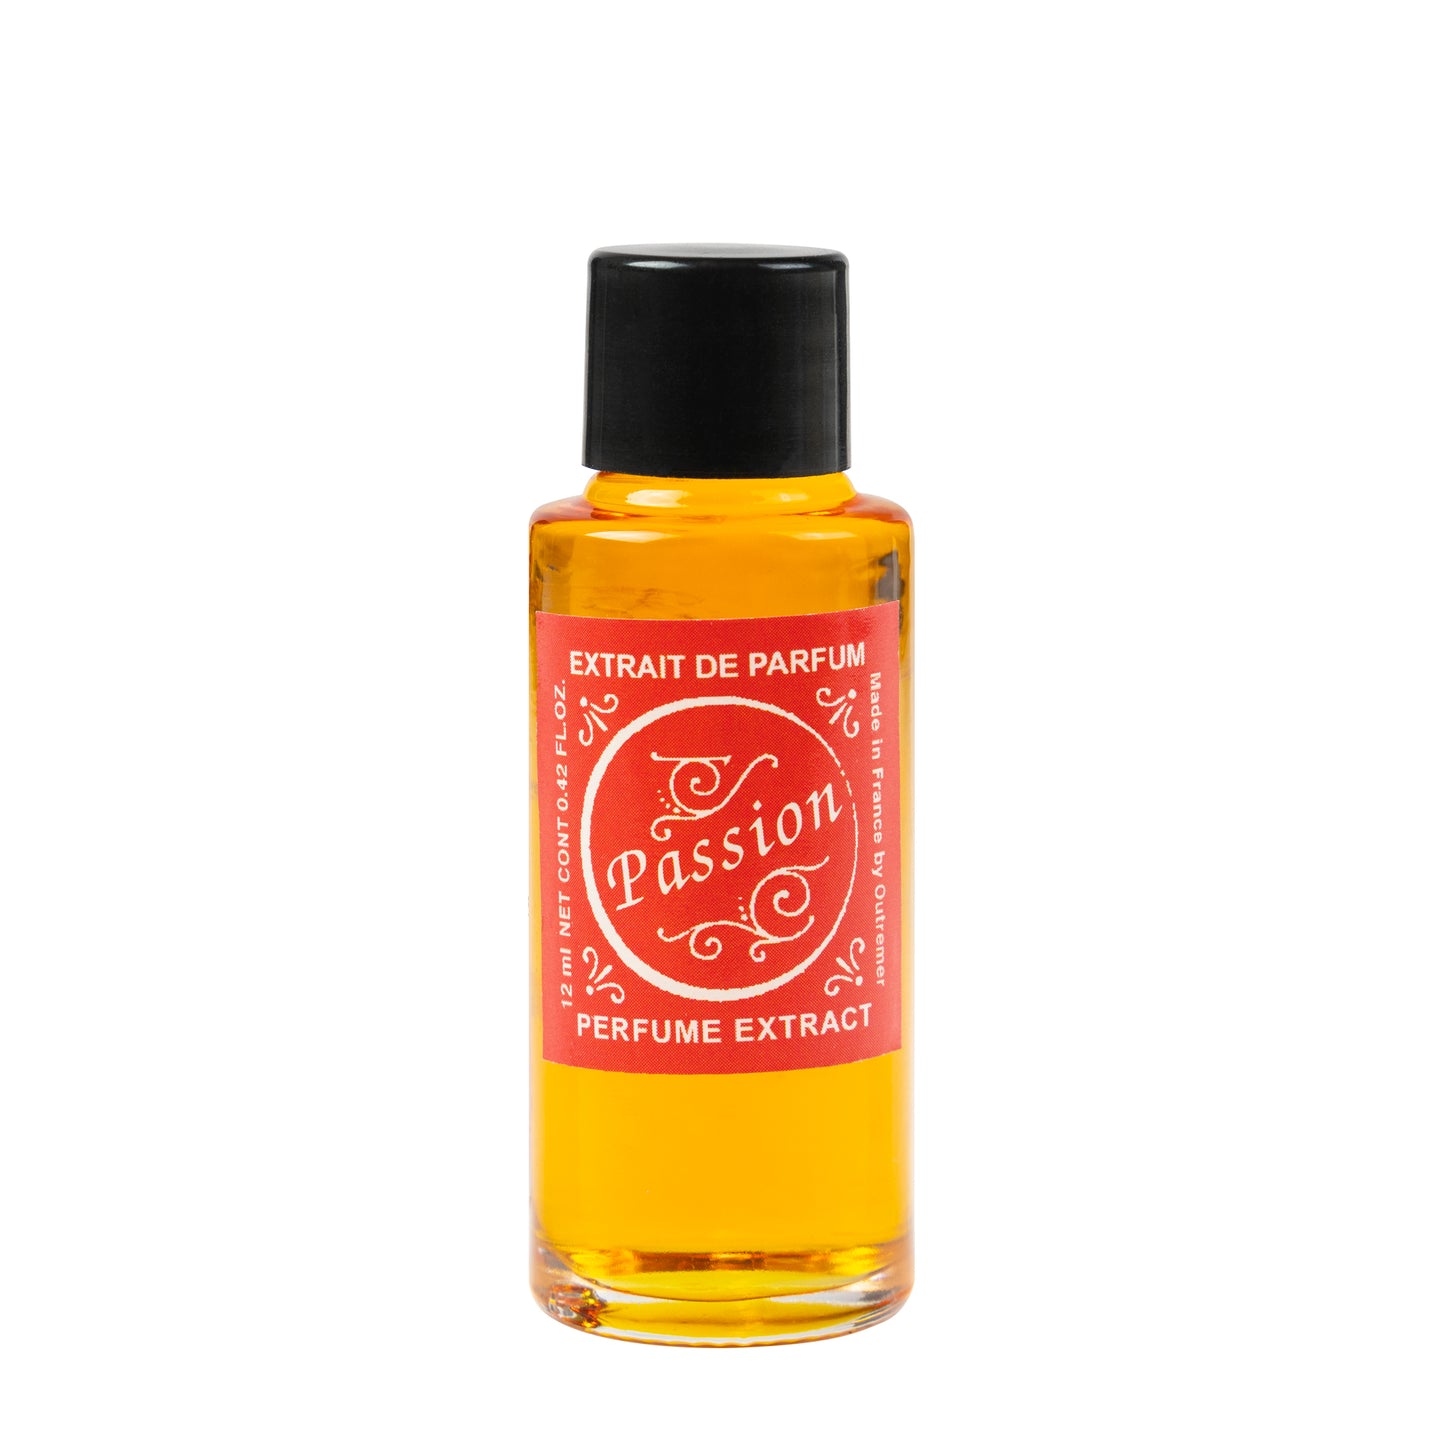 Primary image of Passion Perfume Extract